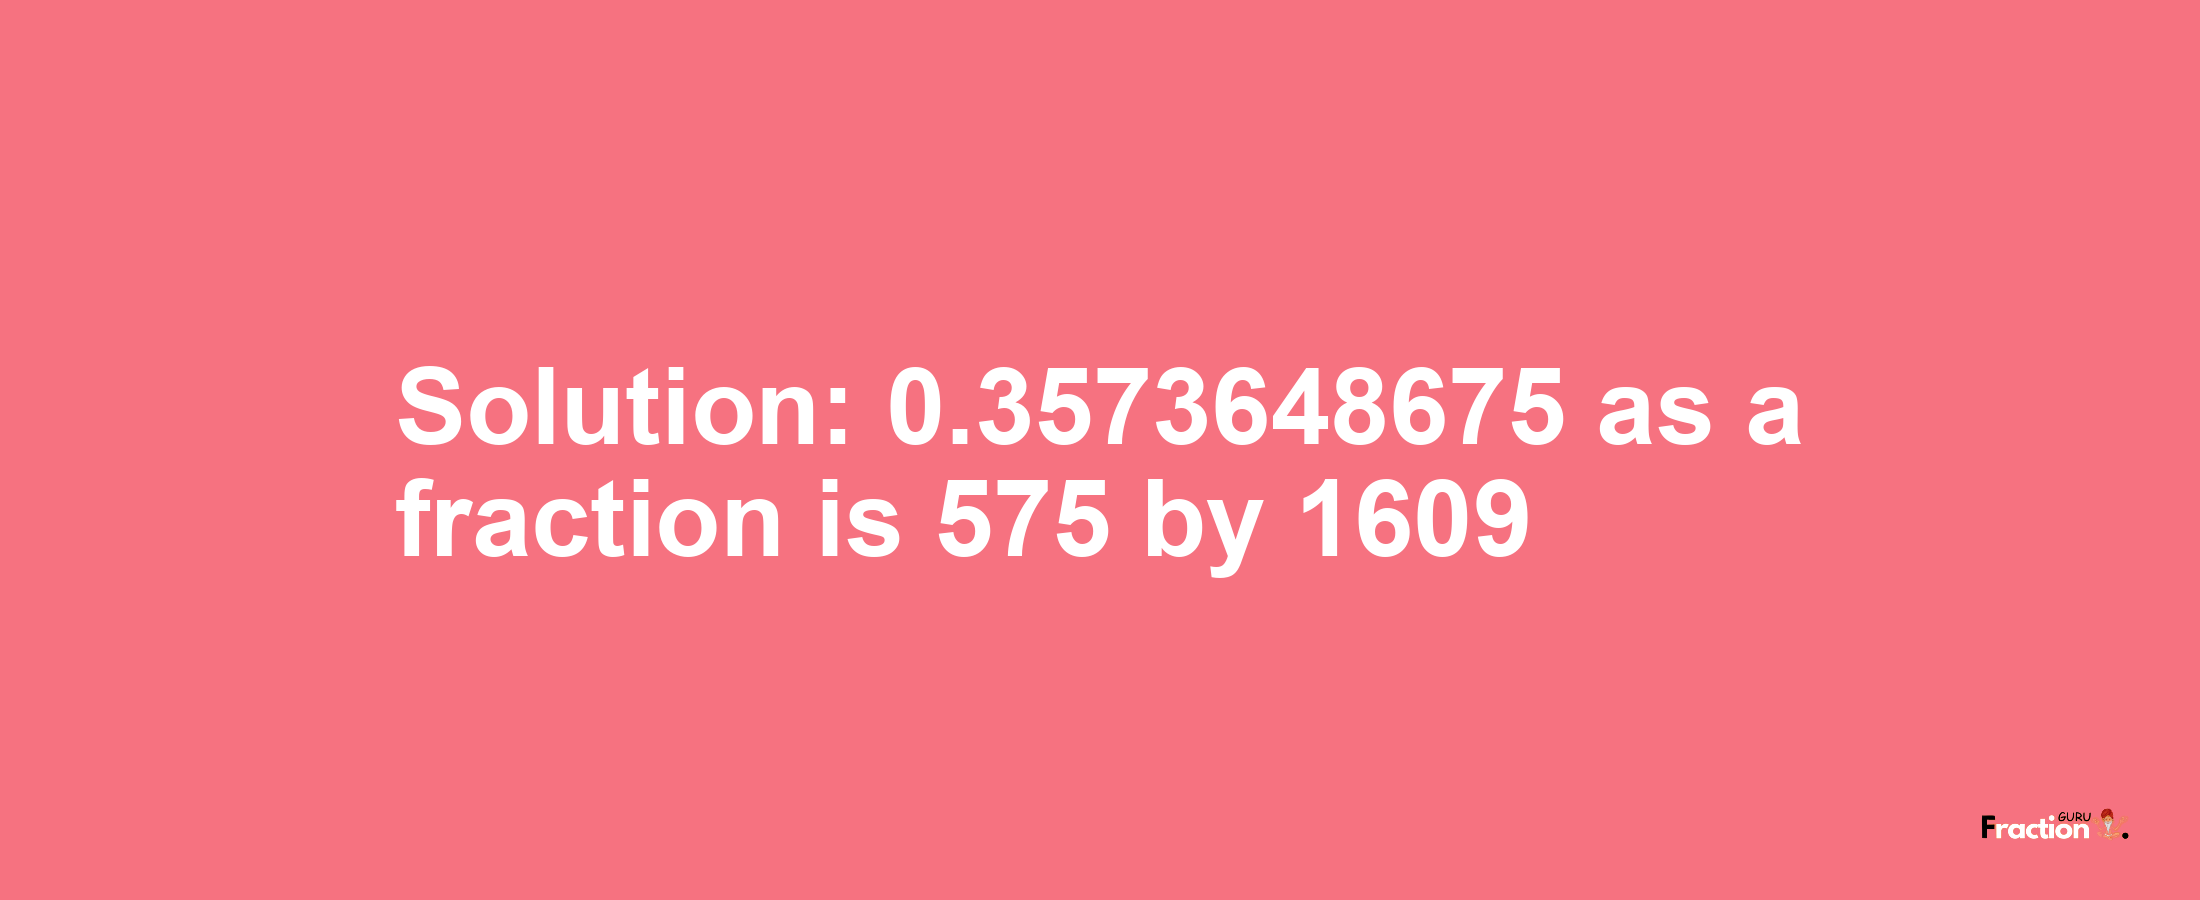 Solution:0.3573648675 as a fraction is 575/1609